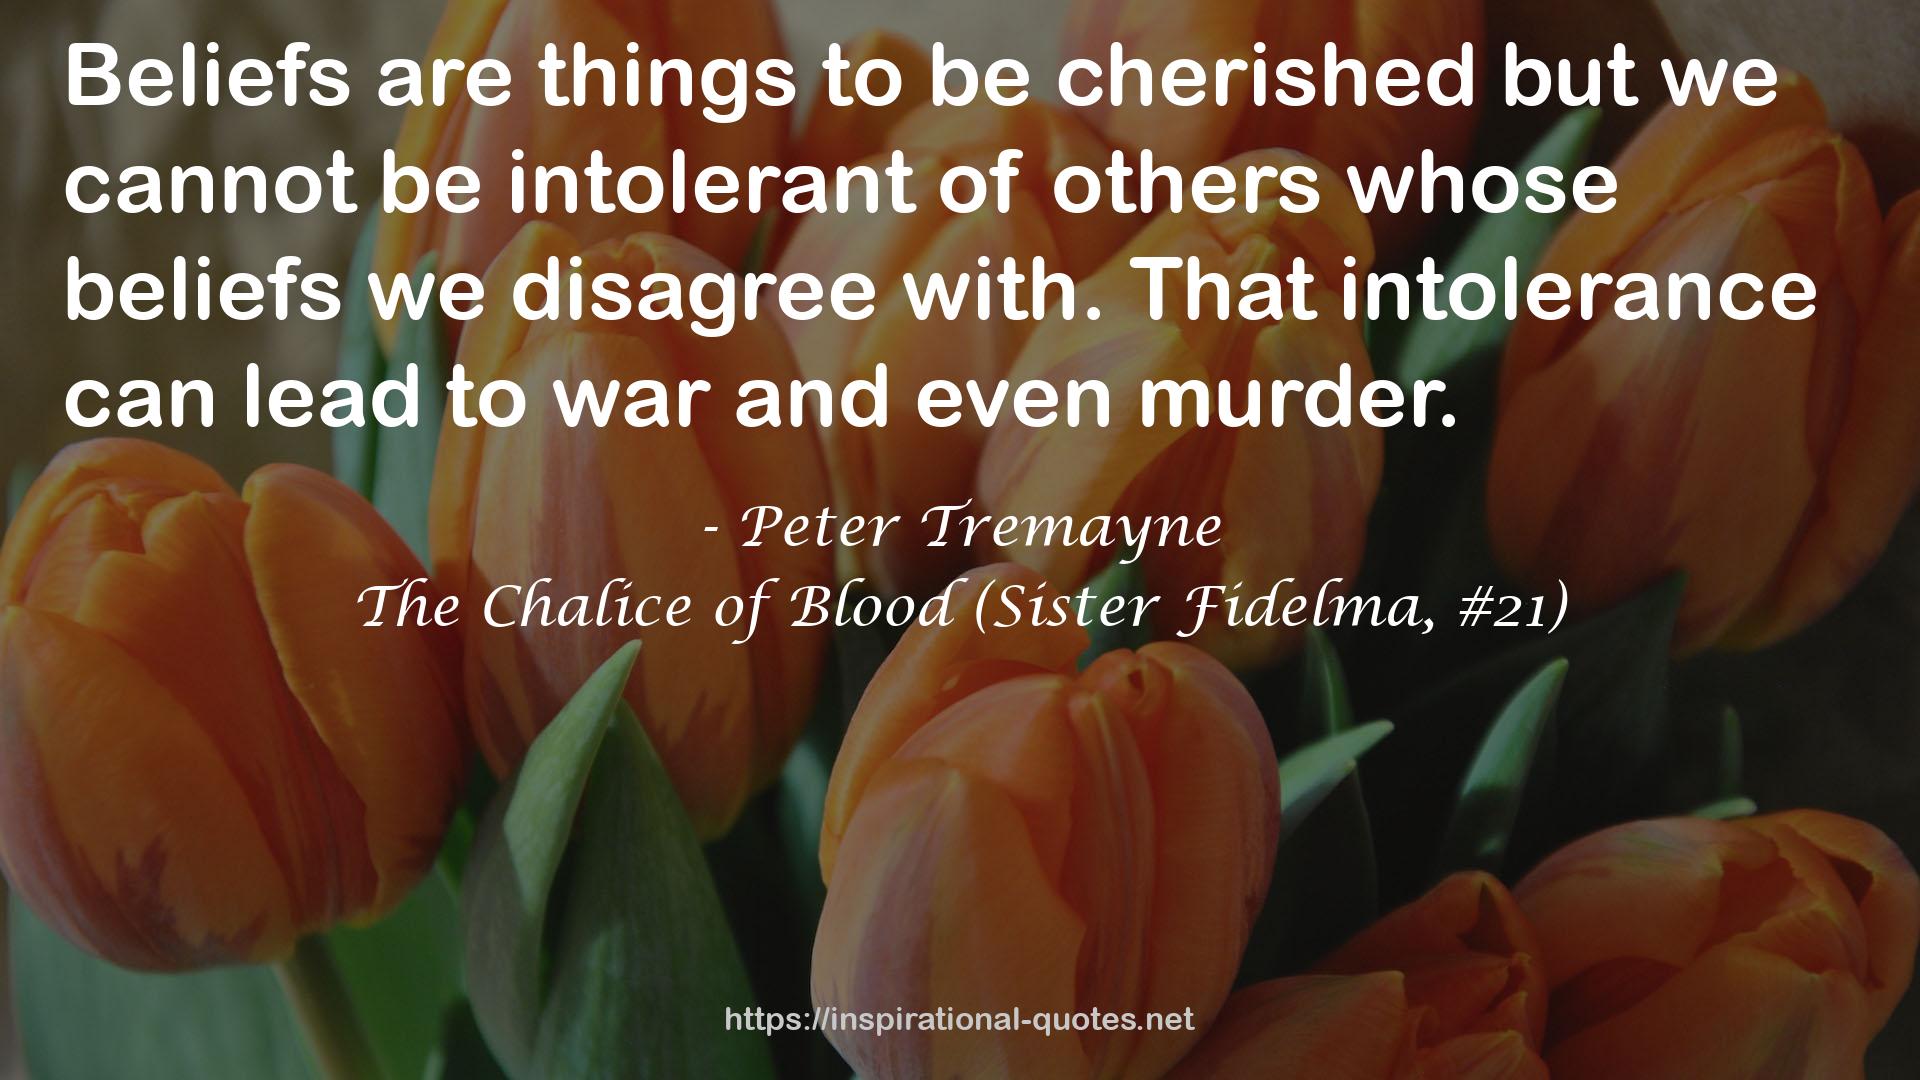 The Chalice of Blood (Sister Fidelma, #21) QUOTES